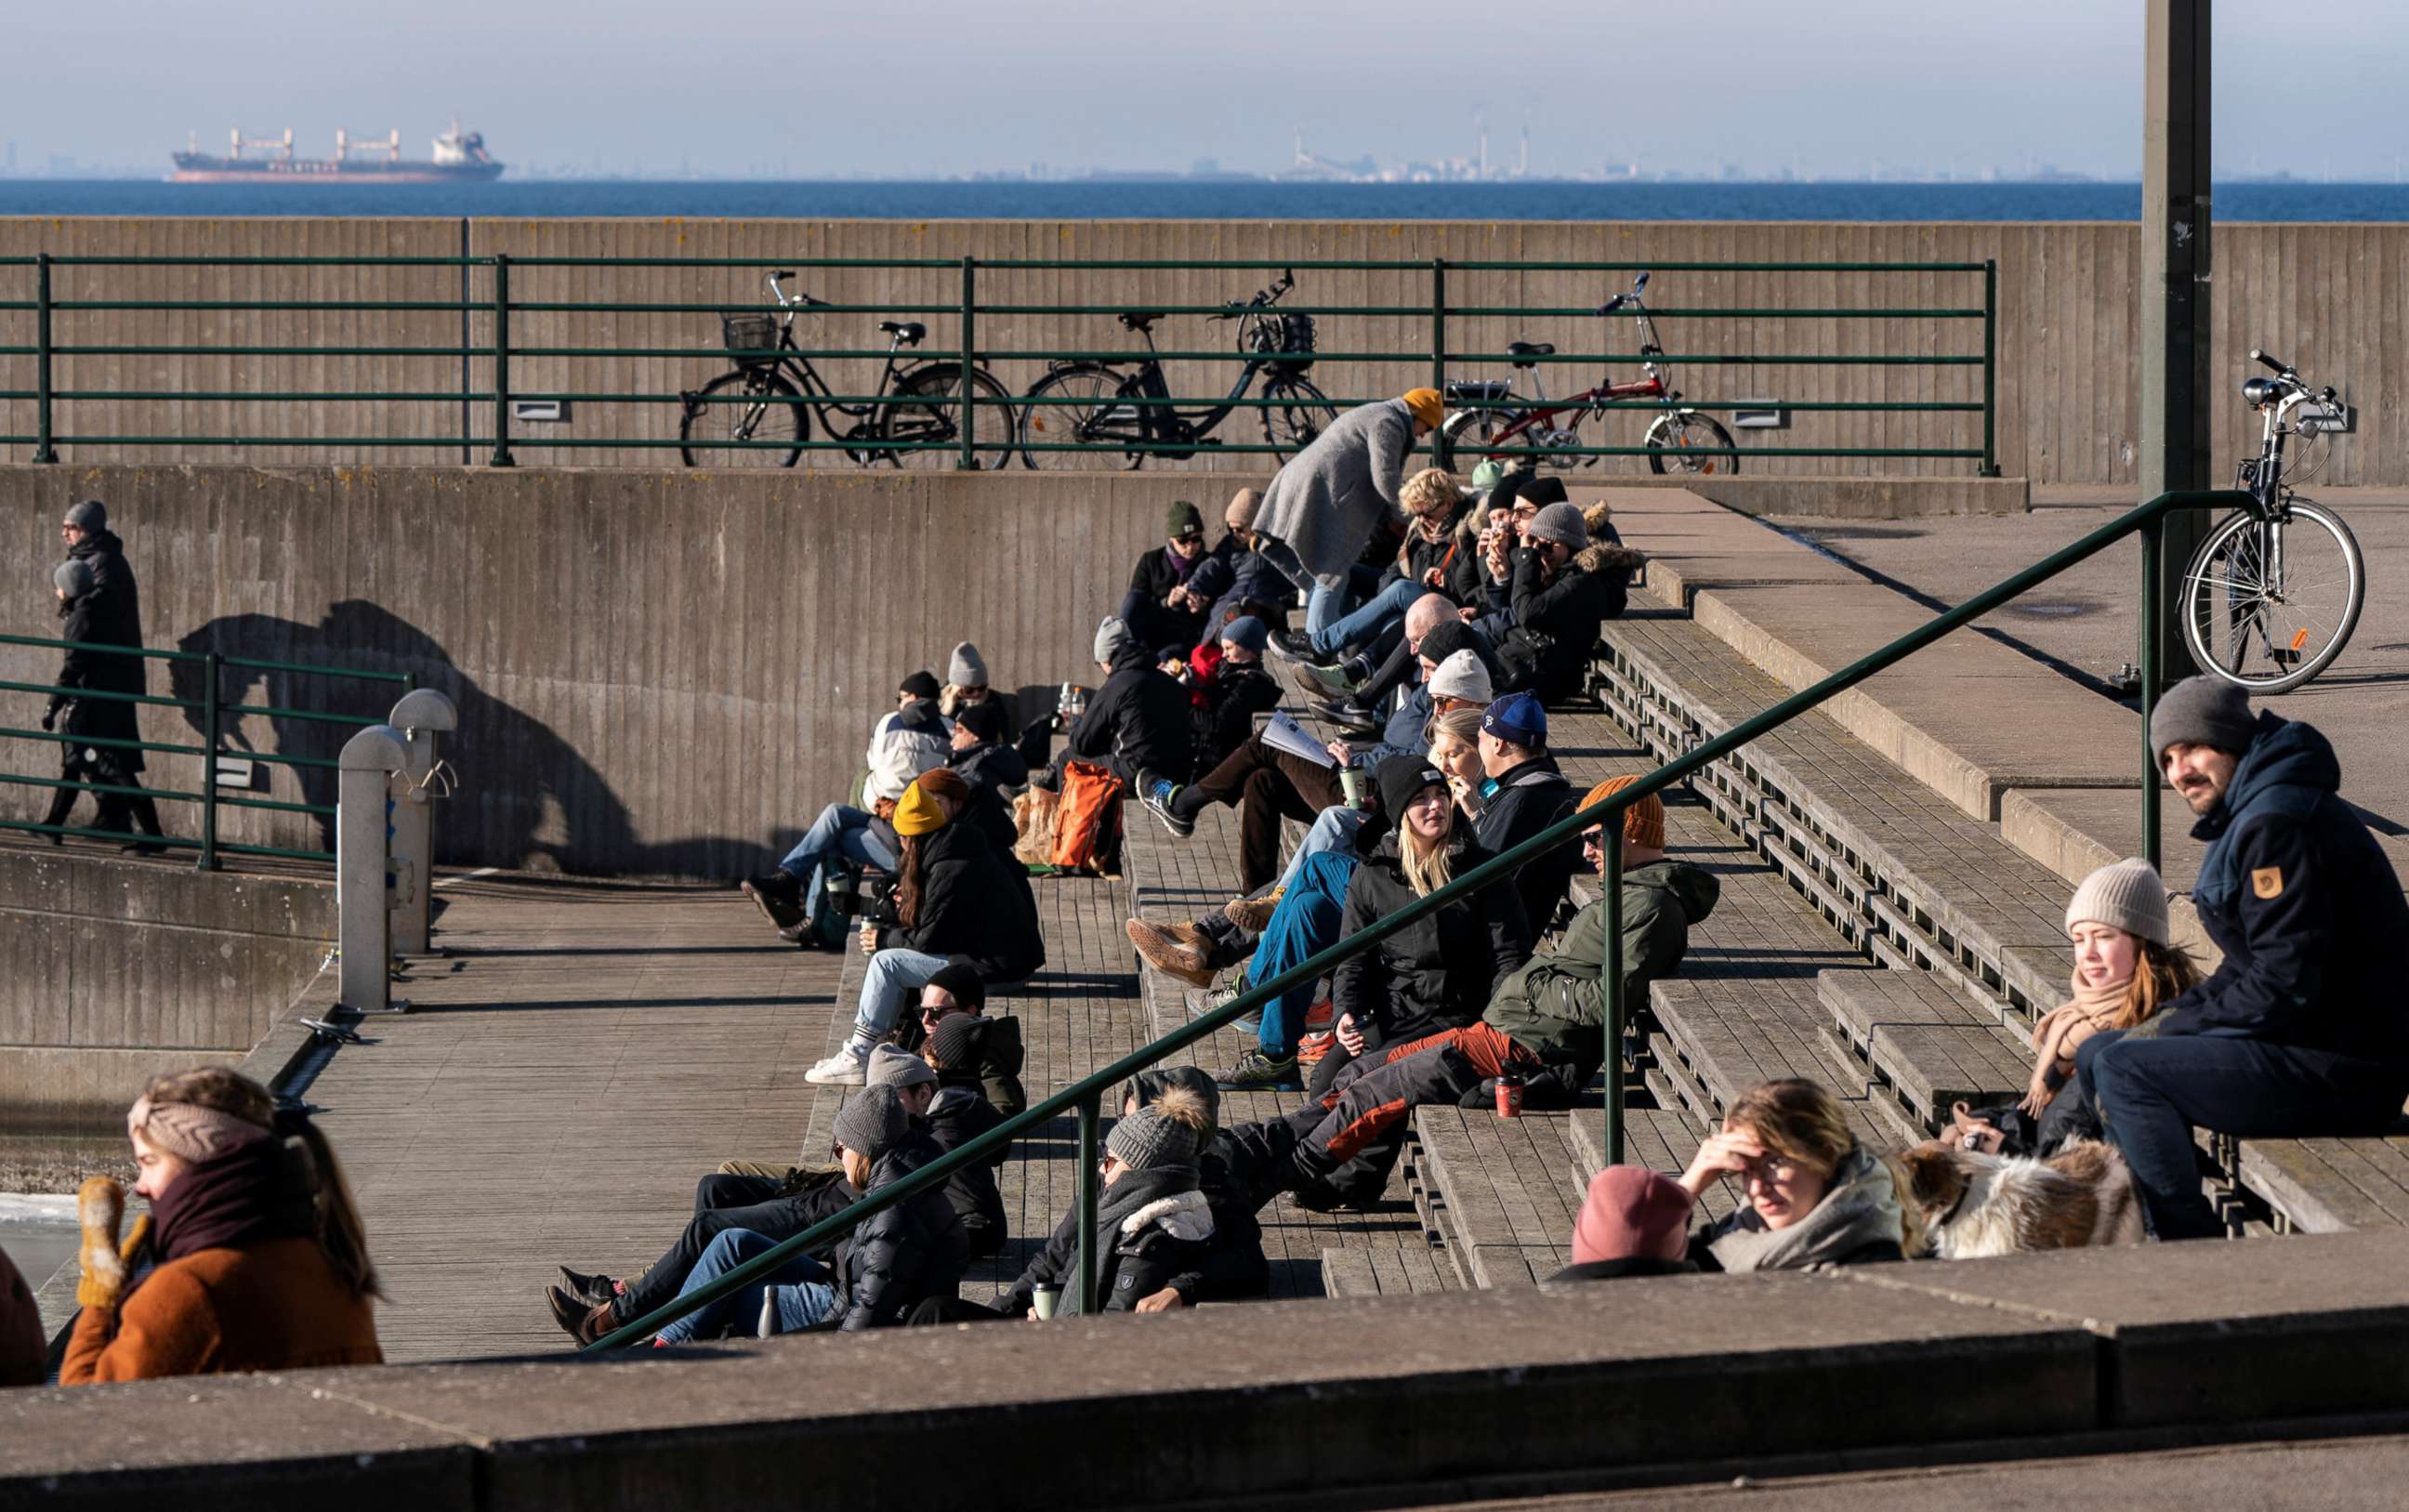 PHOTO: People enjoy a sunny winter day in Malmo, Sweden, on Feb. 14, 2021.